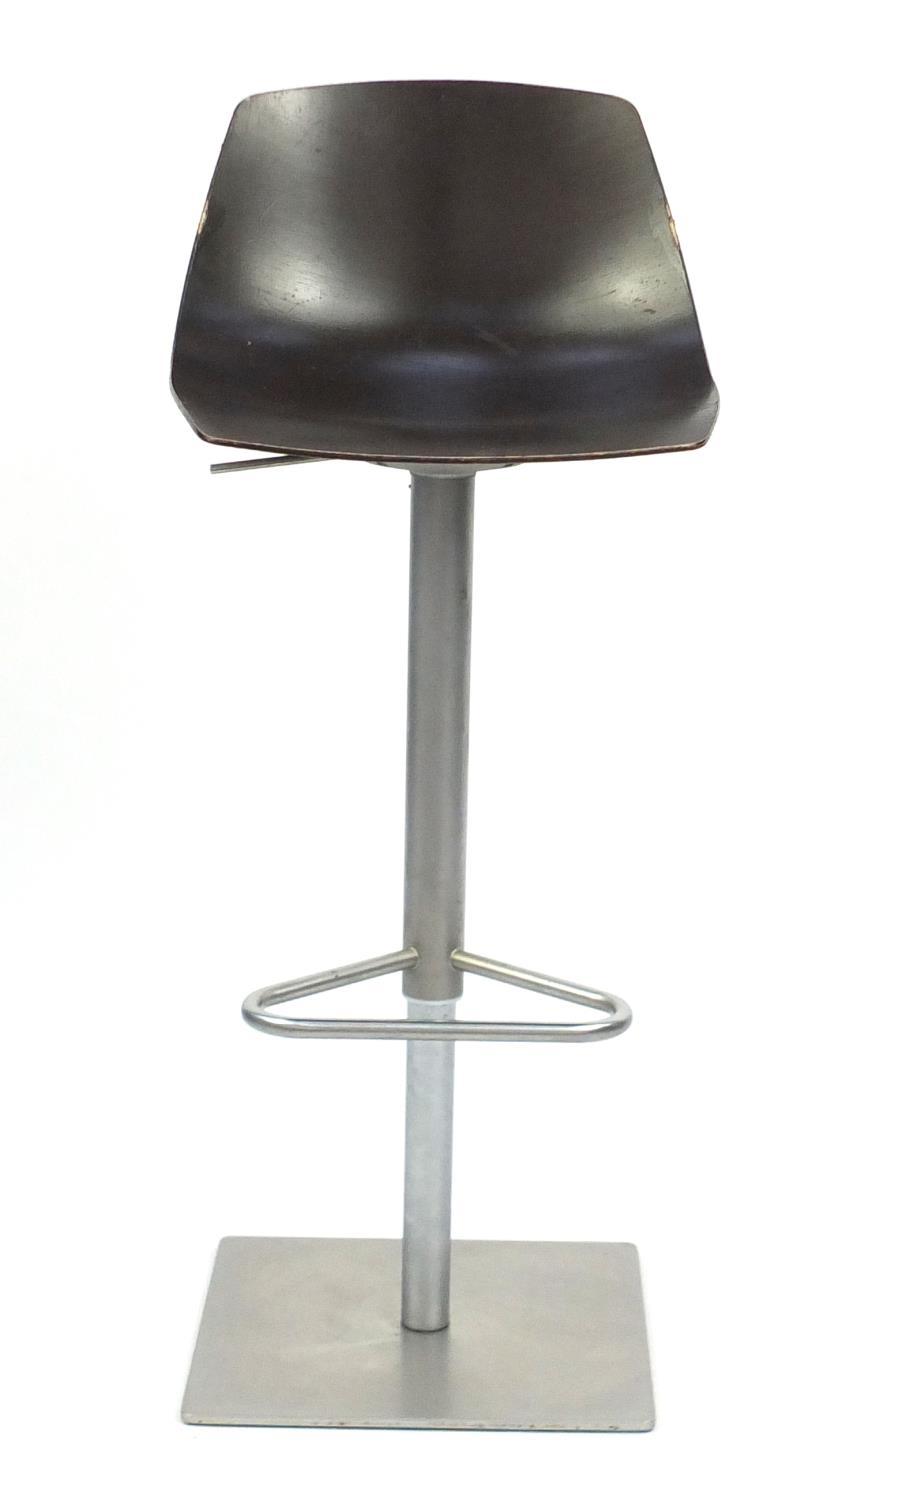 Lapalma Miunn adjustable bar stool designed by Karri Monni, 101cm high : For Further Condition - Image 2 of 6